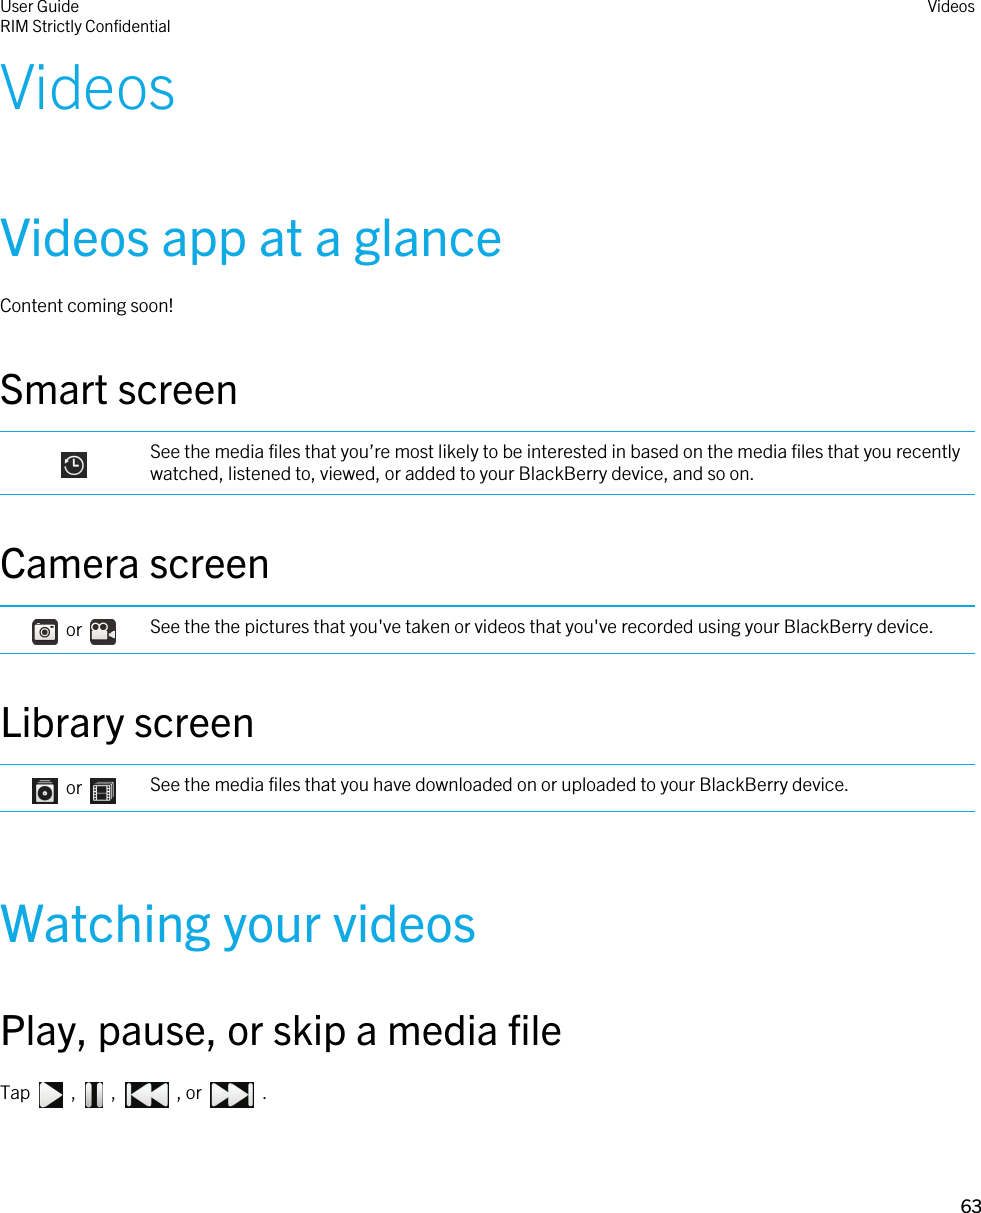 VideosVideos app at a glanceContent coming soon!Smart screen See the media files that you’re most likely to be interested in based on the media files that you recently watched, listened to, viewed, or added to your BlackBerry device, and so on.Camera screen    or  See the the pictures that you&apos;ve taken or videos that you&apos;ve recorded using your BlackBerry device.Library screen    or  See the media files that you have downloaded on or uploaded to your BlackBerry device.Watching your videosPlay, pause, or skip a media fileTap    ,    ,    , or    . User GuideRIM Strictly Confidential Videos63 